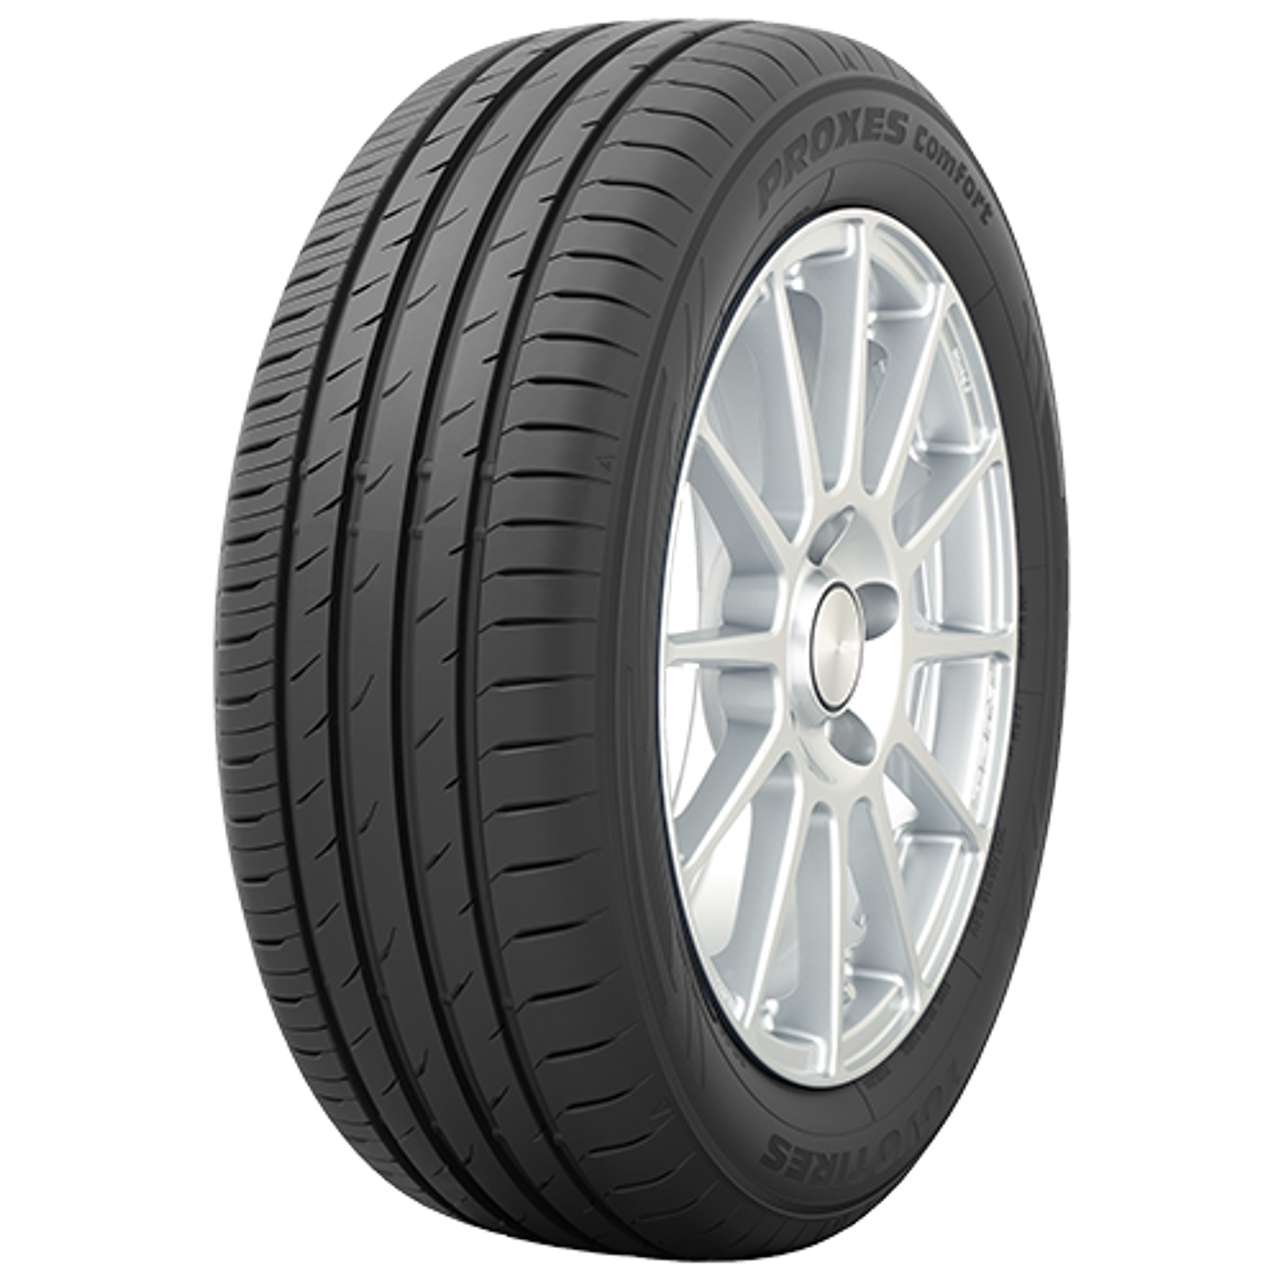 TOYO PROXES COMFORT 205/55R16 91H BSW